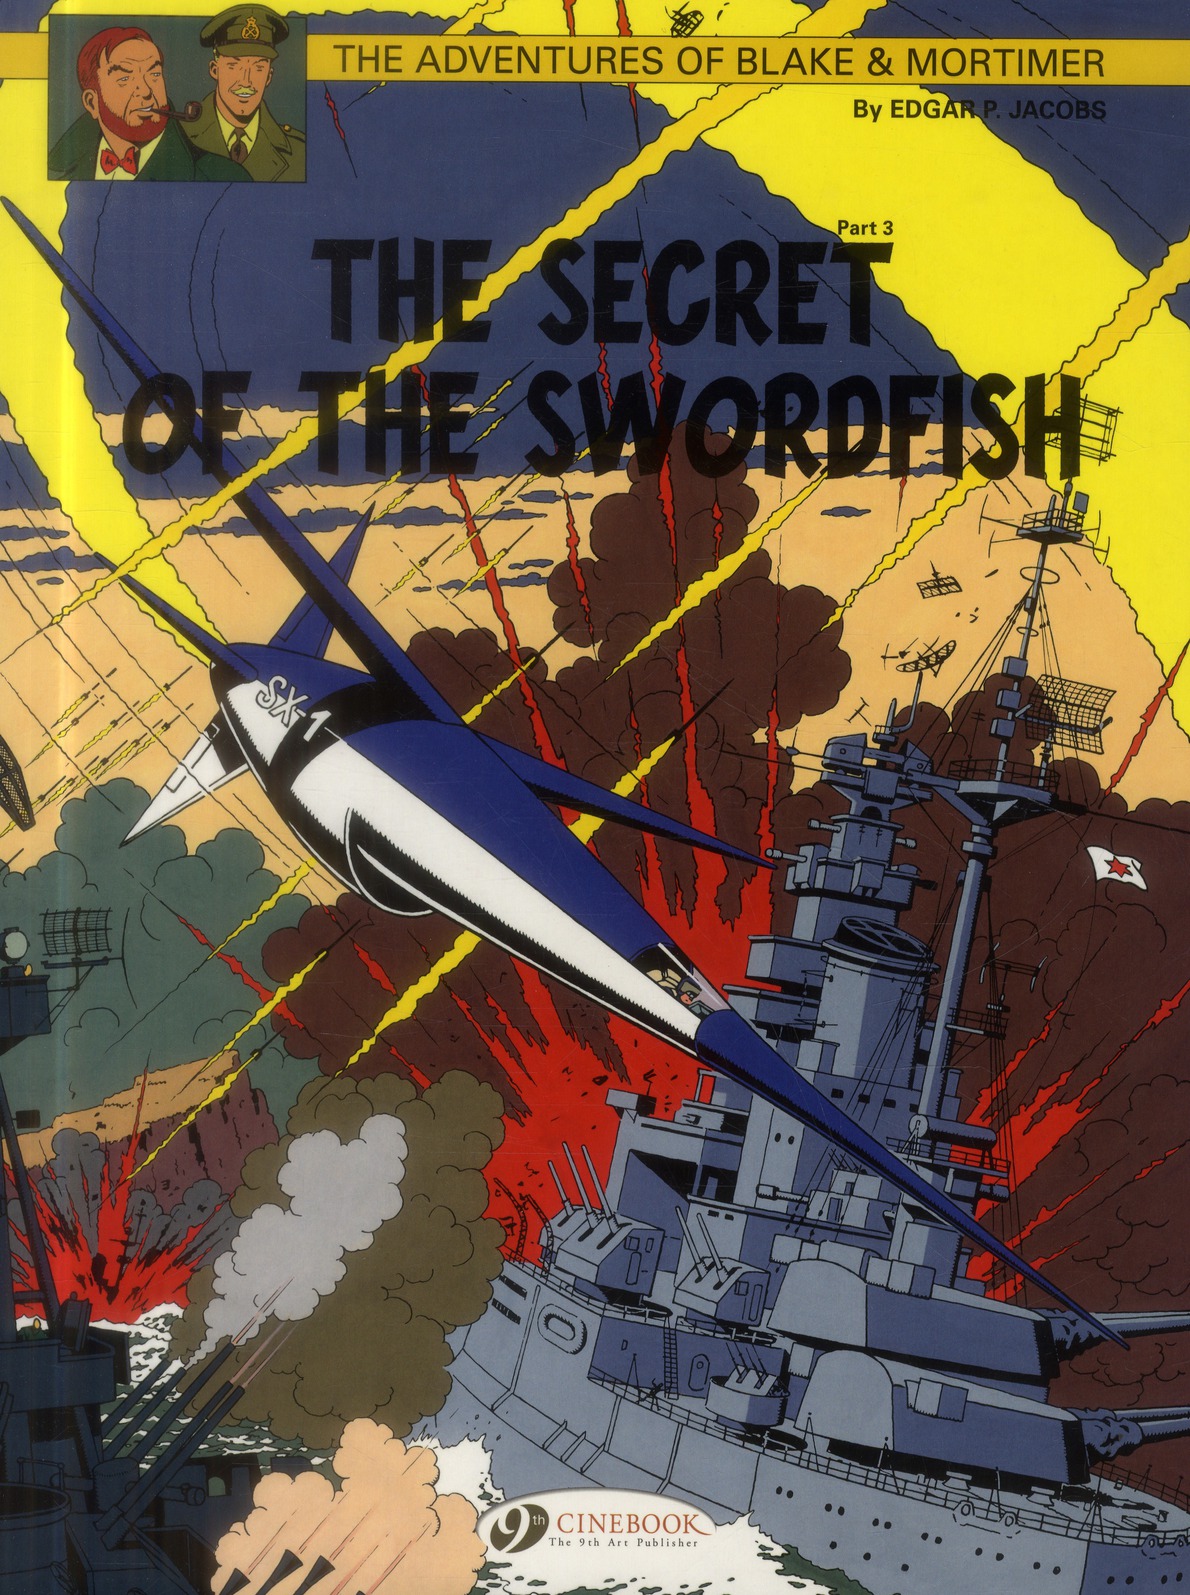 CHARACTERS - BLAKE & MORTIMER - TOME 17 THE SECRET OF THE SWORDISH - VOL17